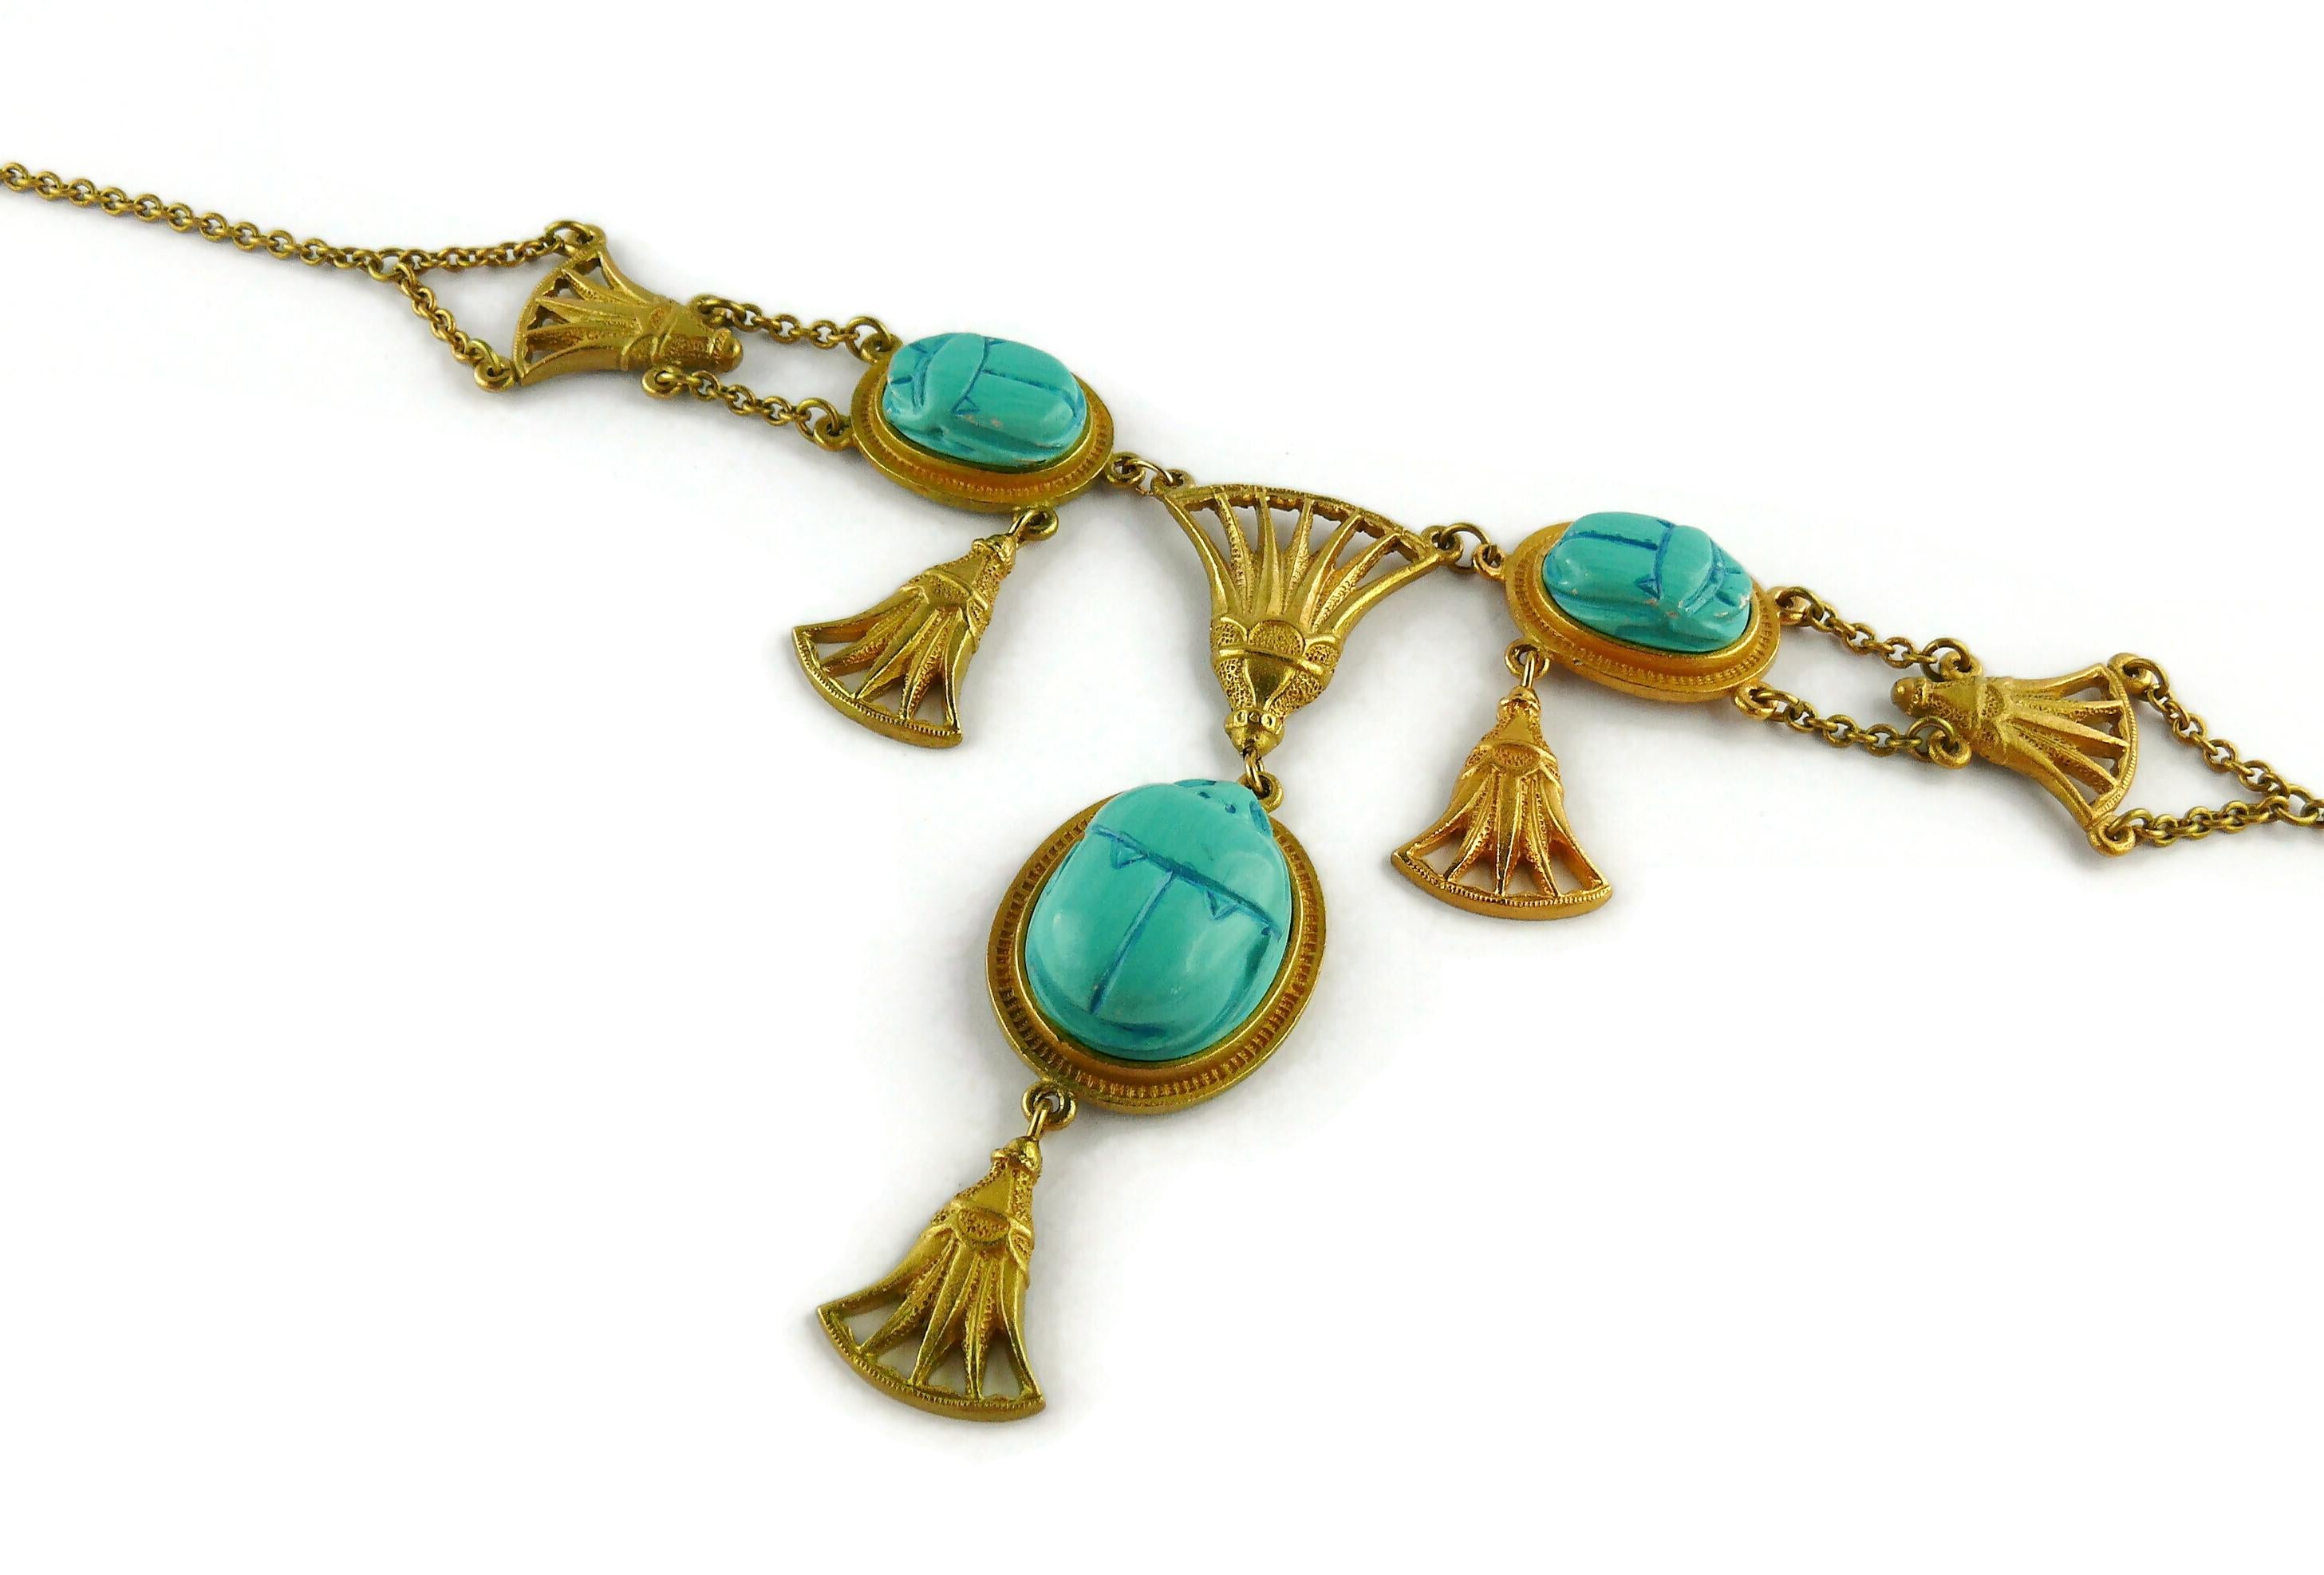 Women's Christian Dior Egyptian Revival Faux Turquoise Scarab Necklace